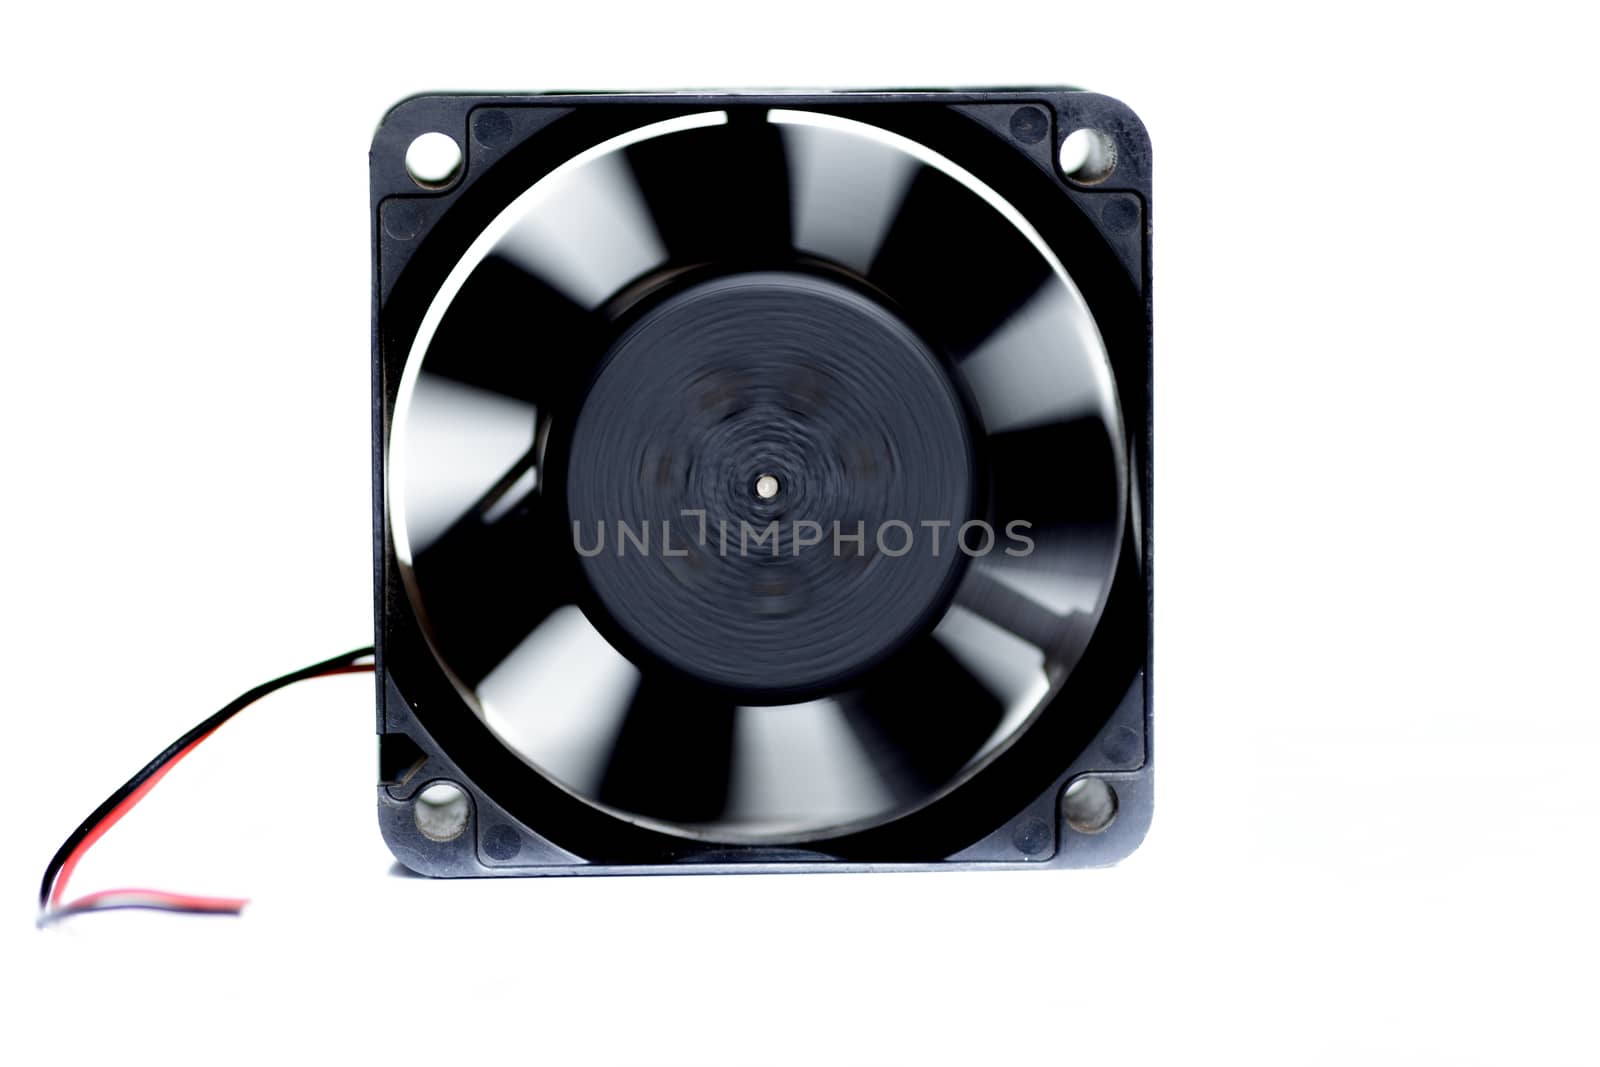 Computer fan. Isolated render on a white background